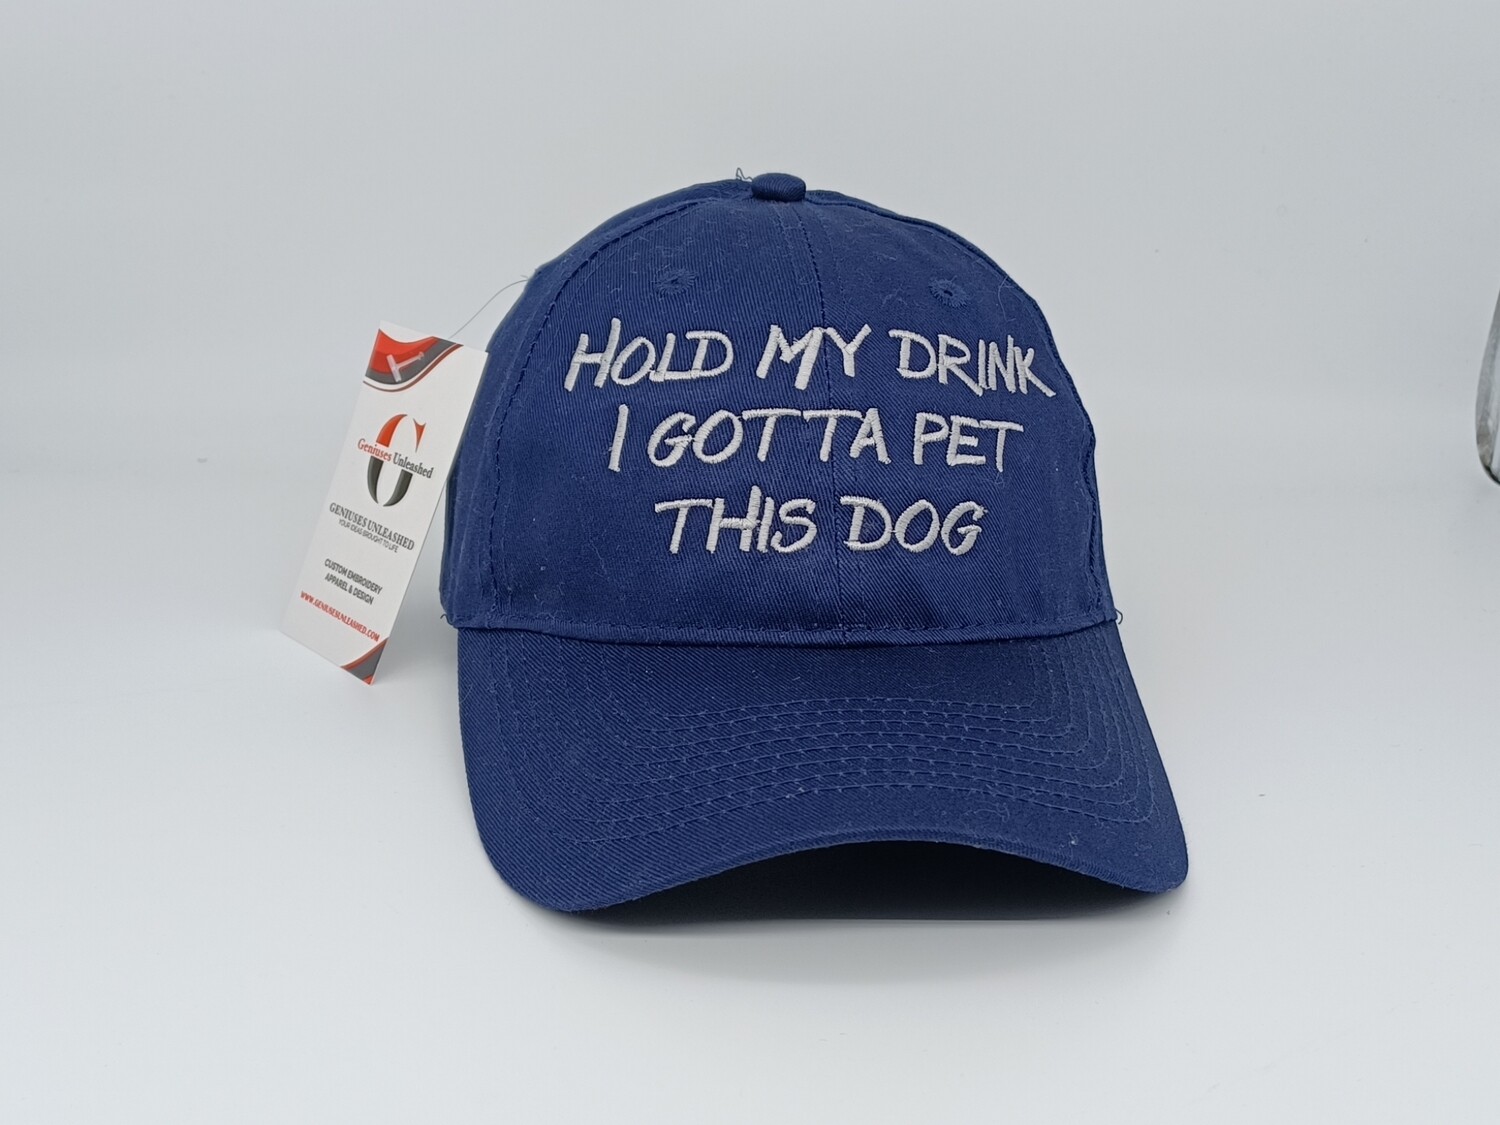 Hold my drink dad hat